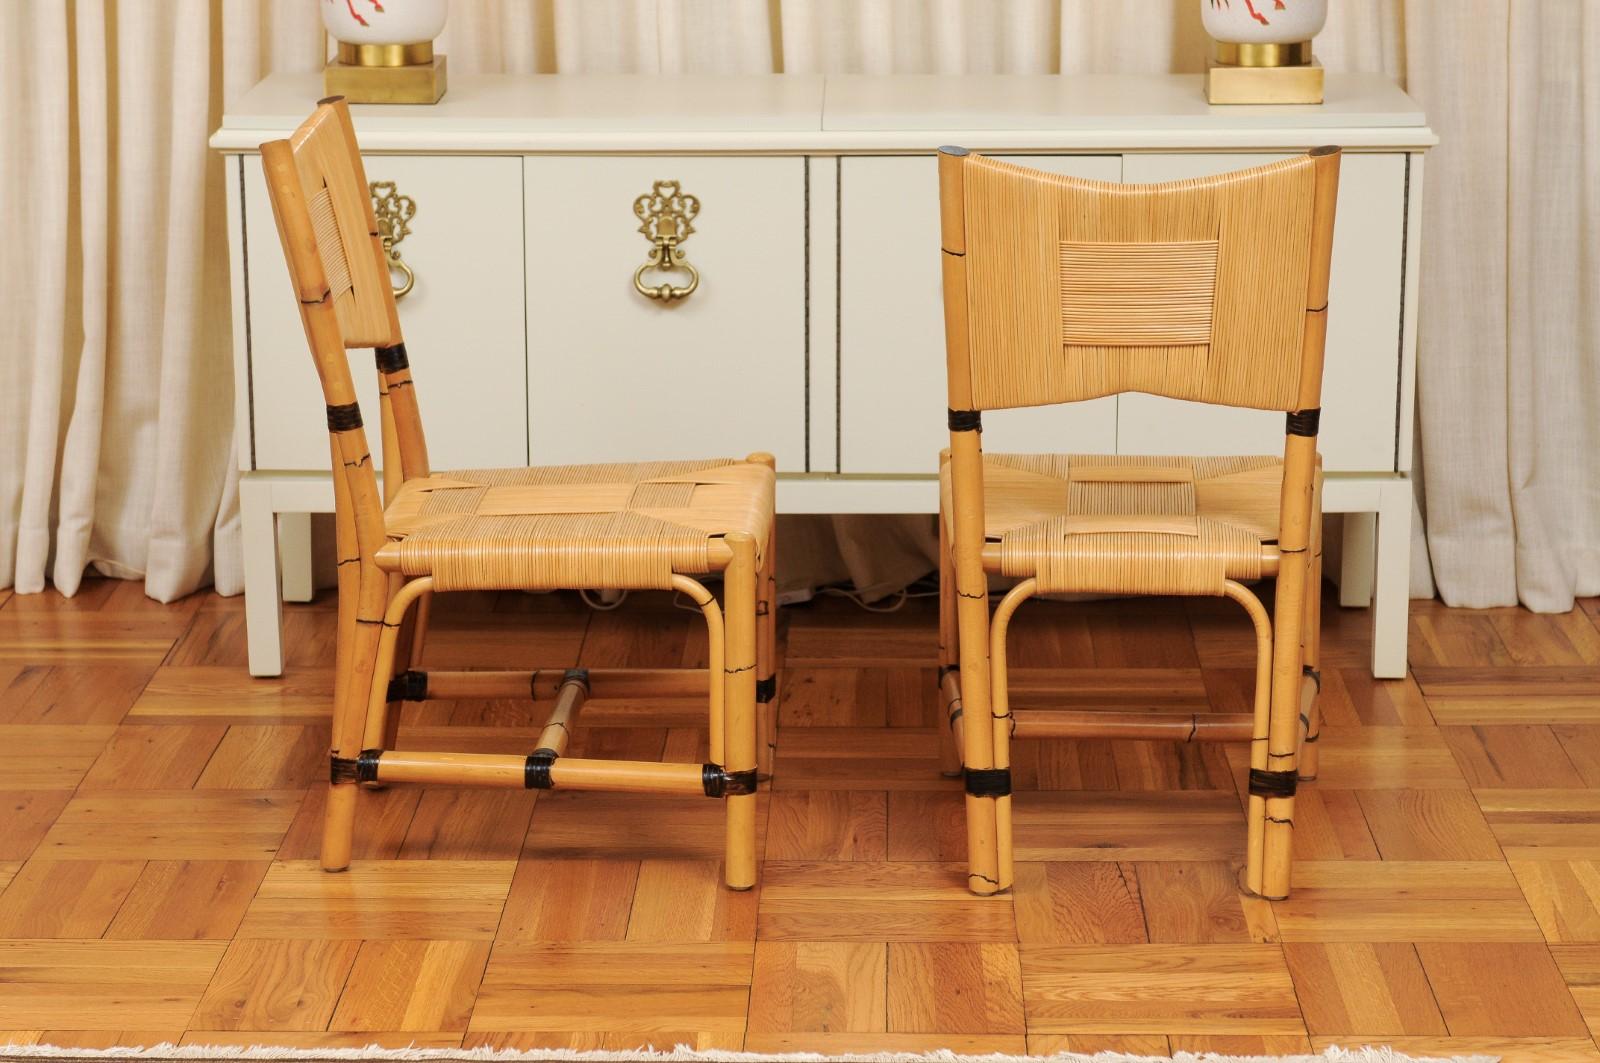 Superb Set of 8 Rush Rattan Dining Chairs by John Hutton for Donghia, circa 1995 For Sale 2